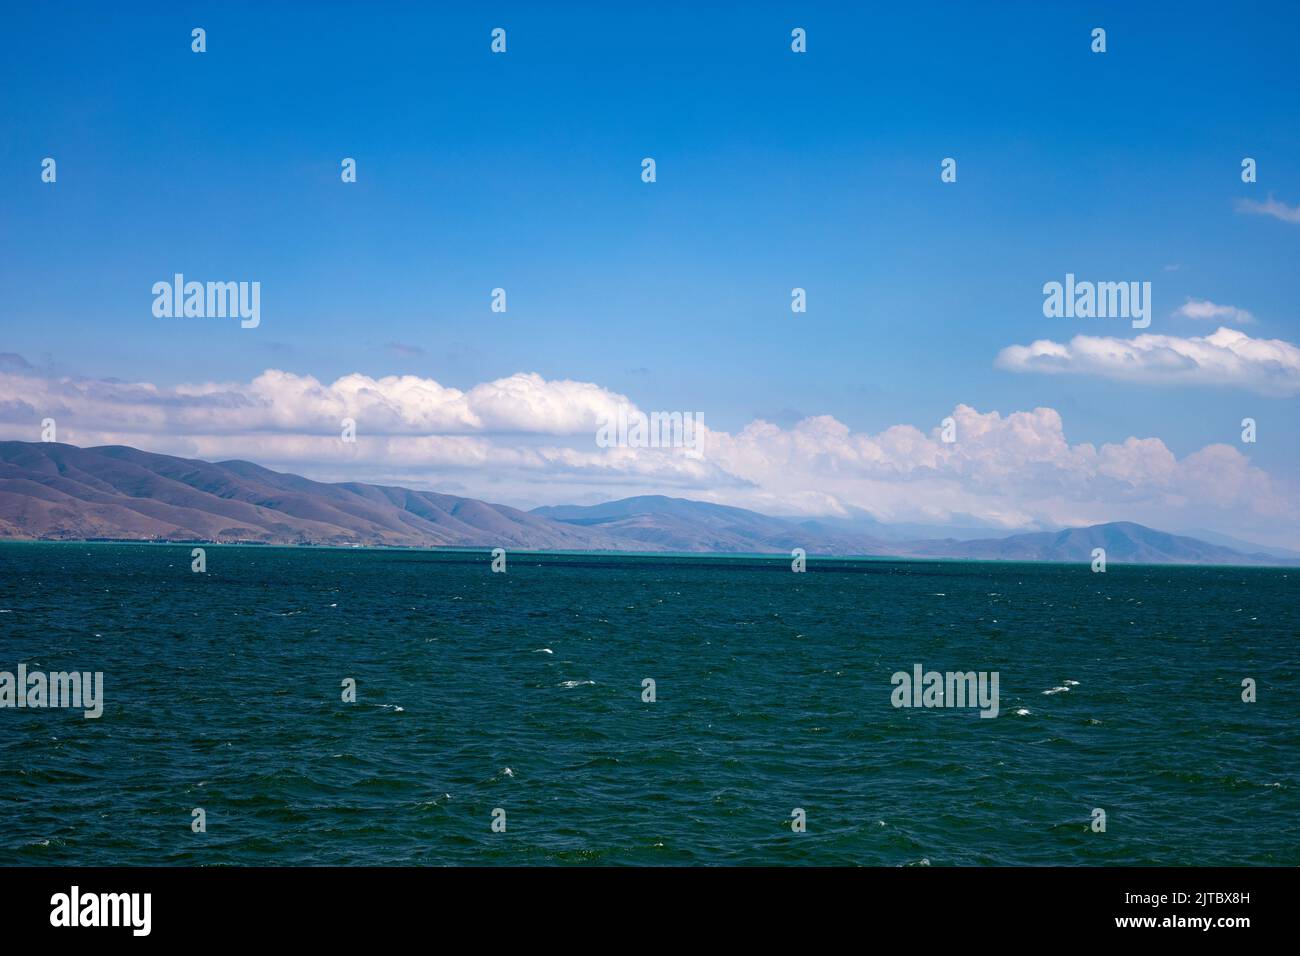 Lake Sevan partially colored in turquoise on a windy day, with mountains in the background in summer Stock Photo